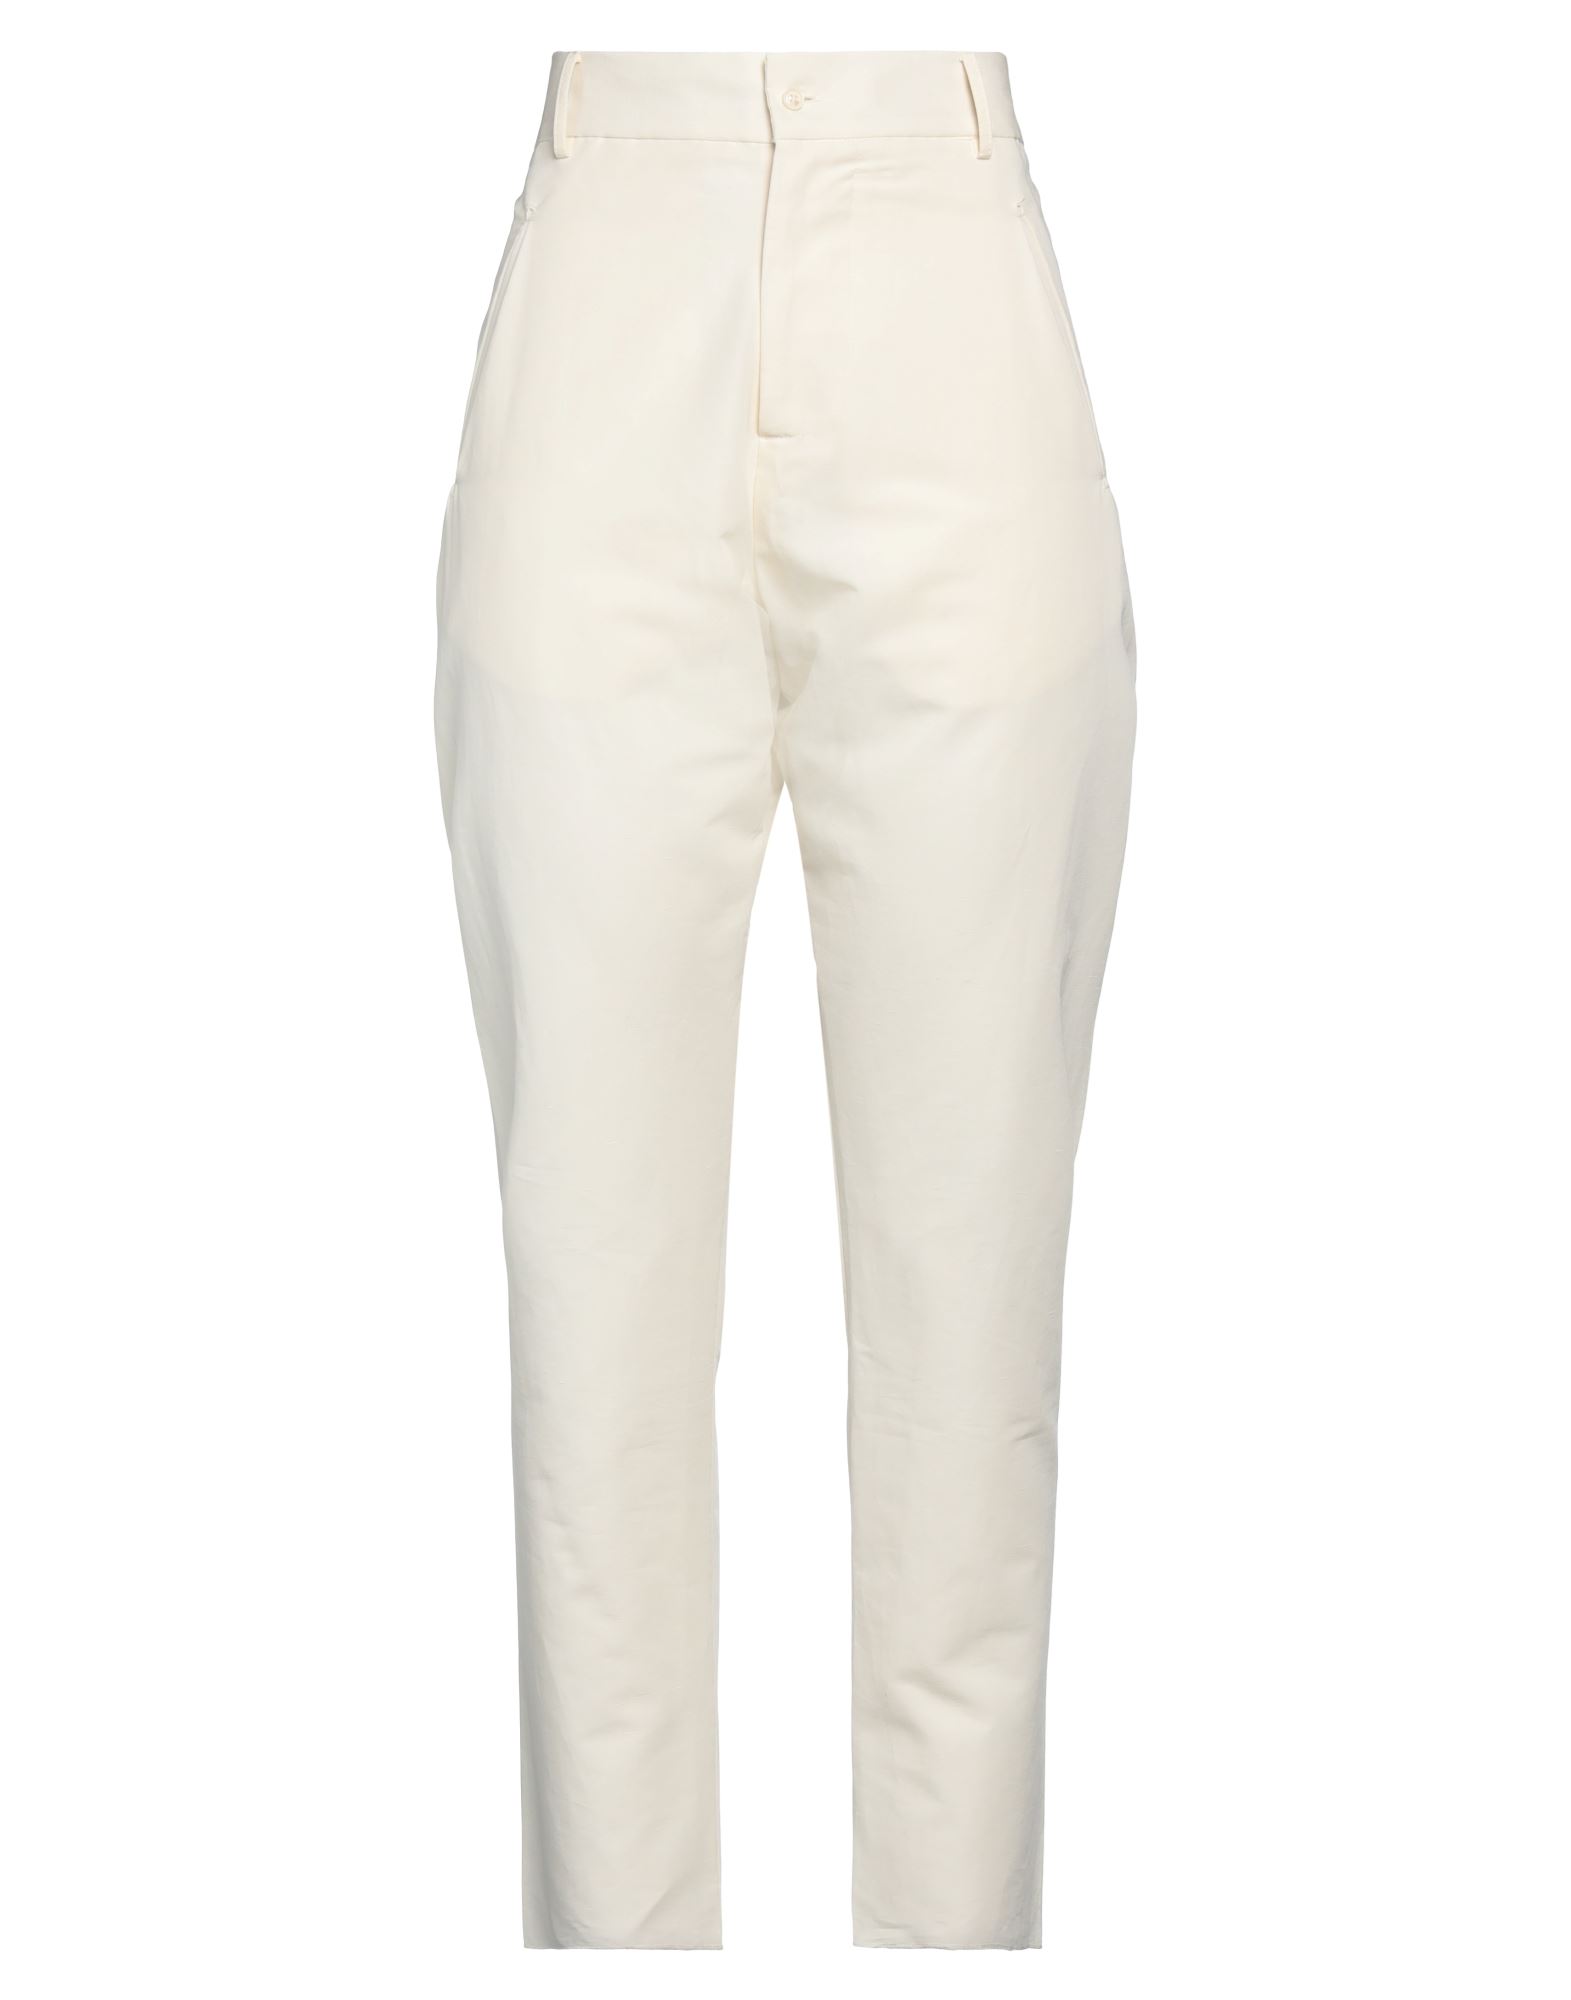 Art 259 Design By Alberto Affinito Pants In White